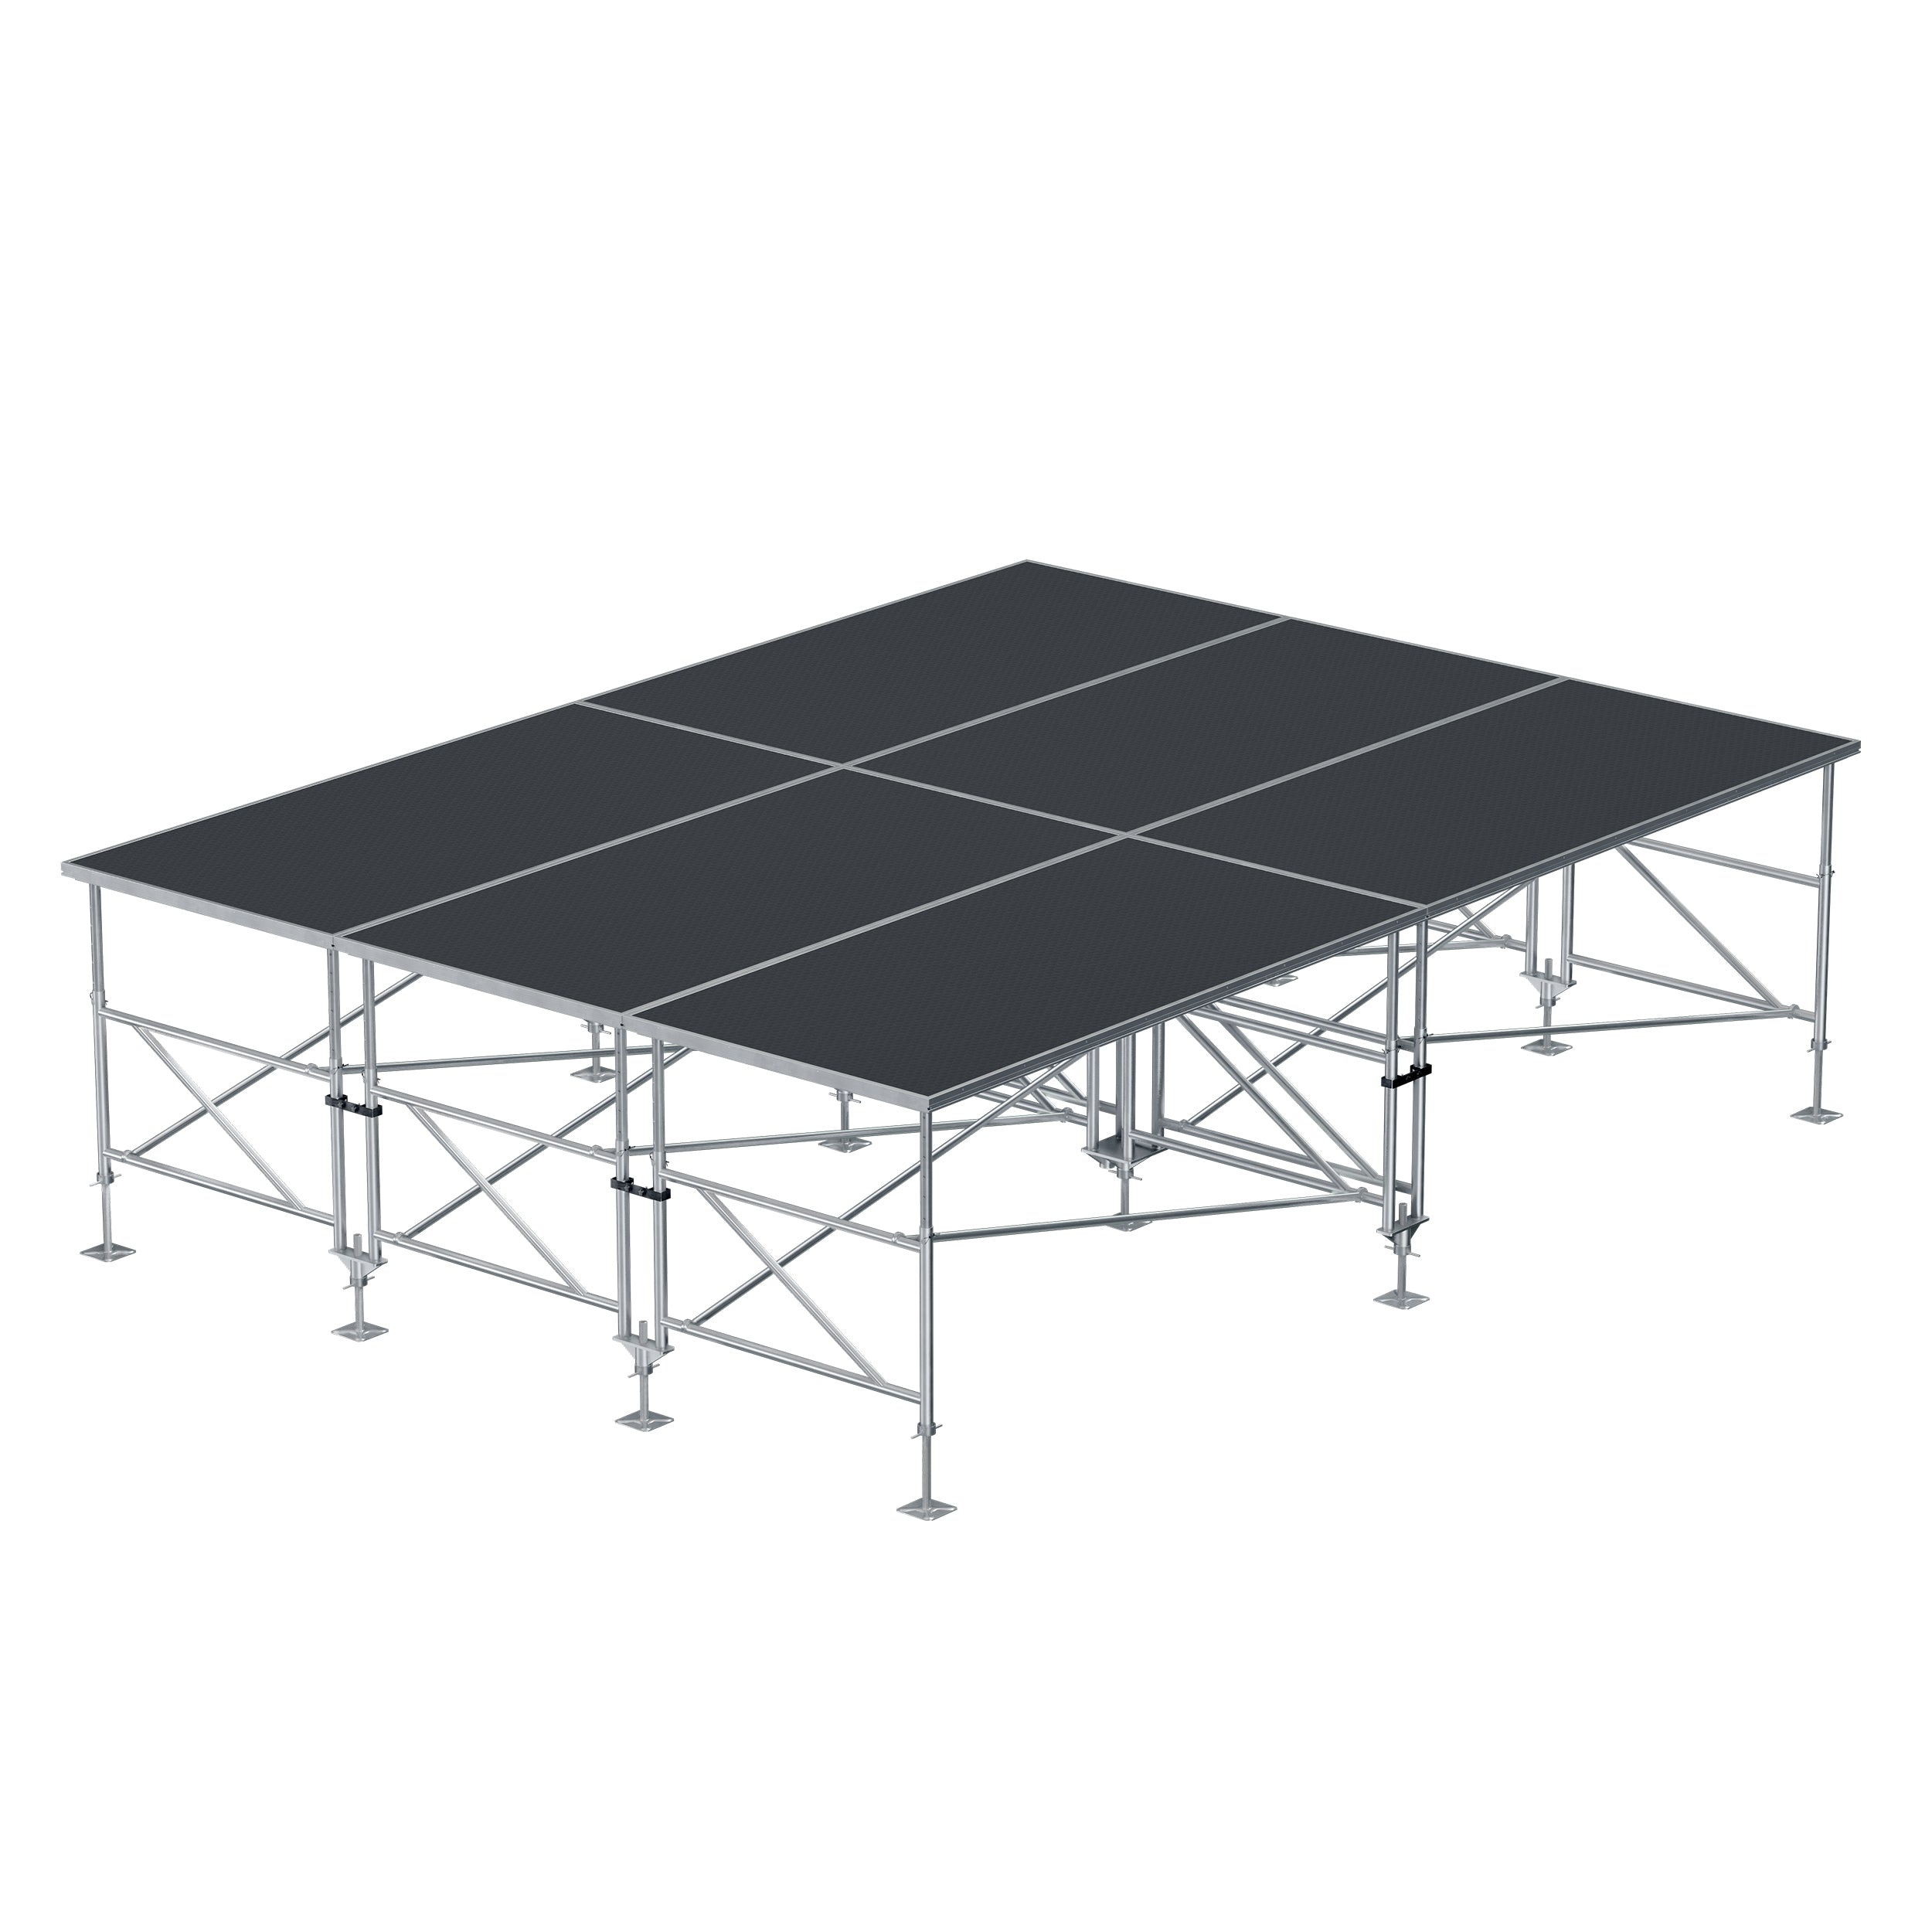 Pro X 12FT x 16FT Stage Q 6 Stage Platforms 4FT x 8FT Height Adjustable 28-48 inch with Z Frame Stabilizing System XSQ-12X16PKG-48Z